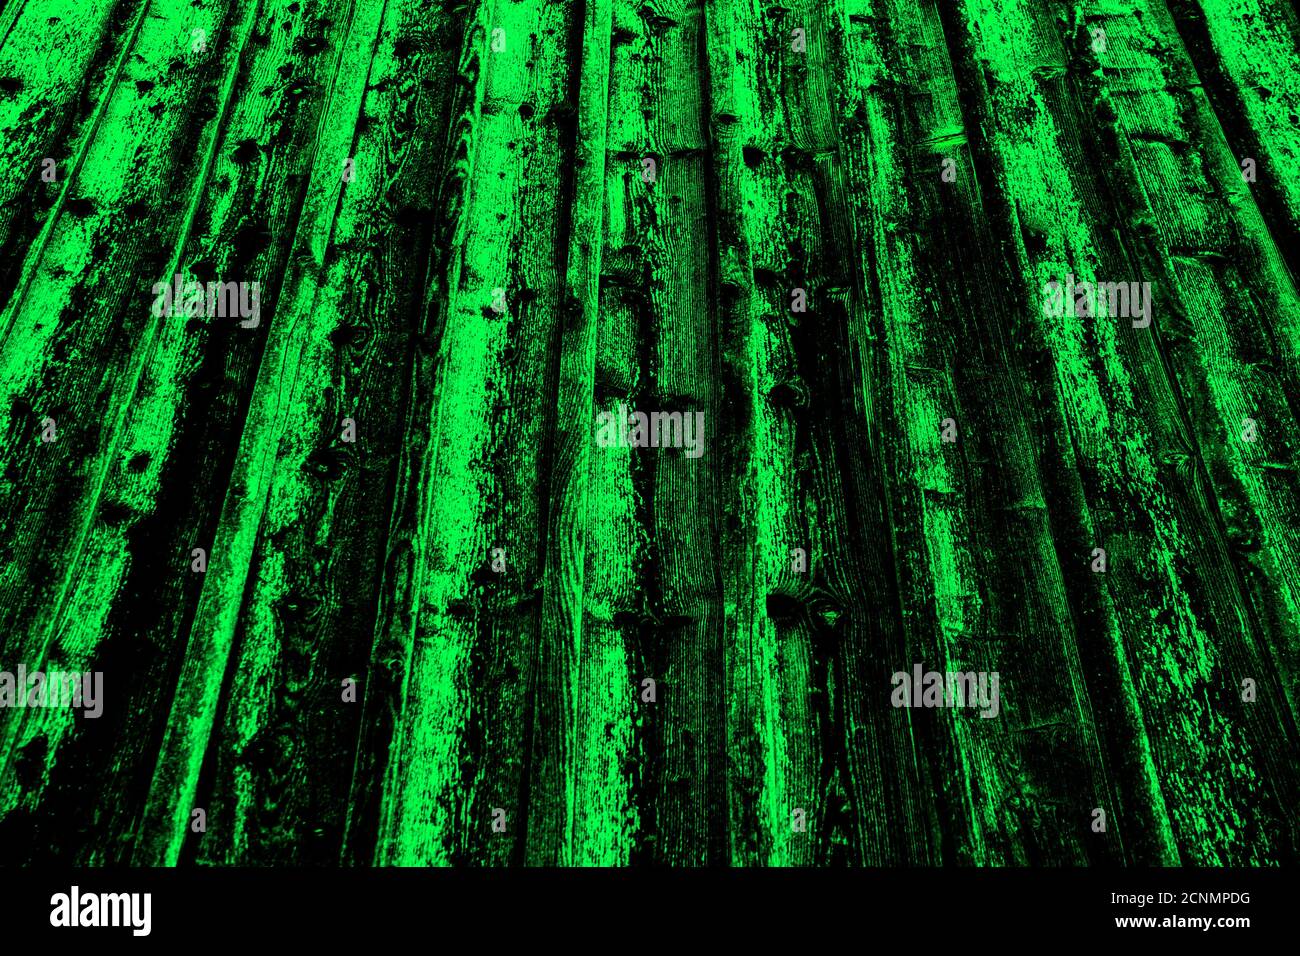 Green and black wooden texture with diminishing perspective Stock Photo